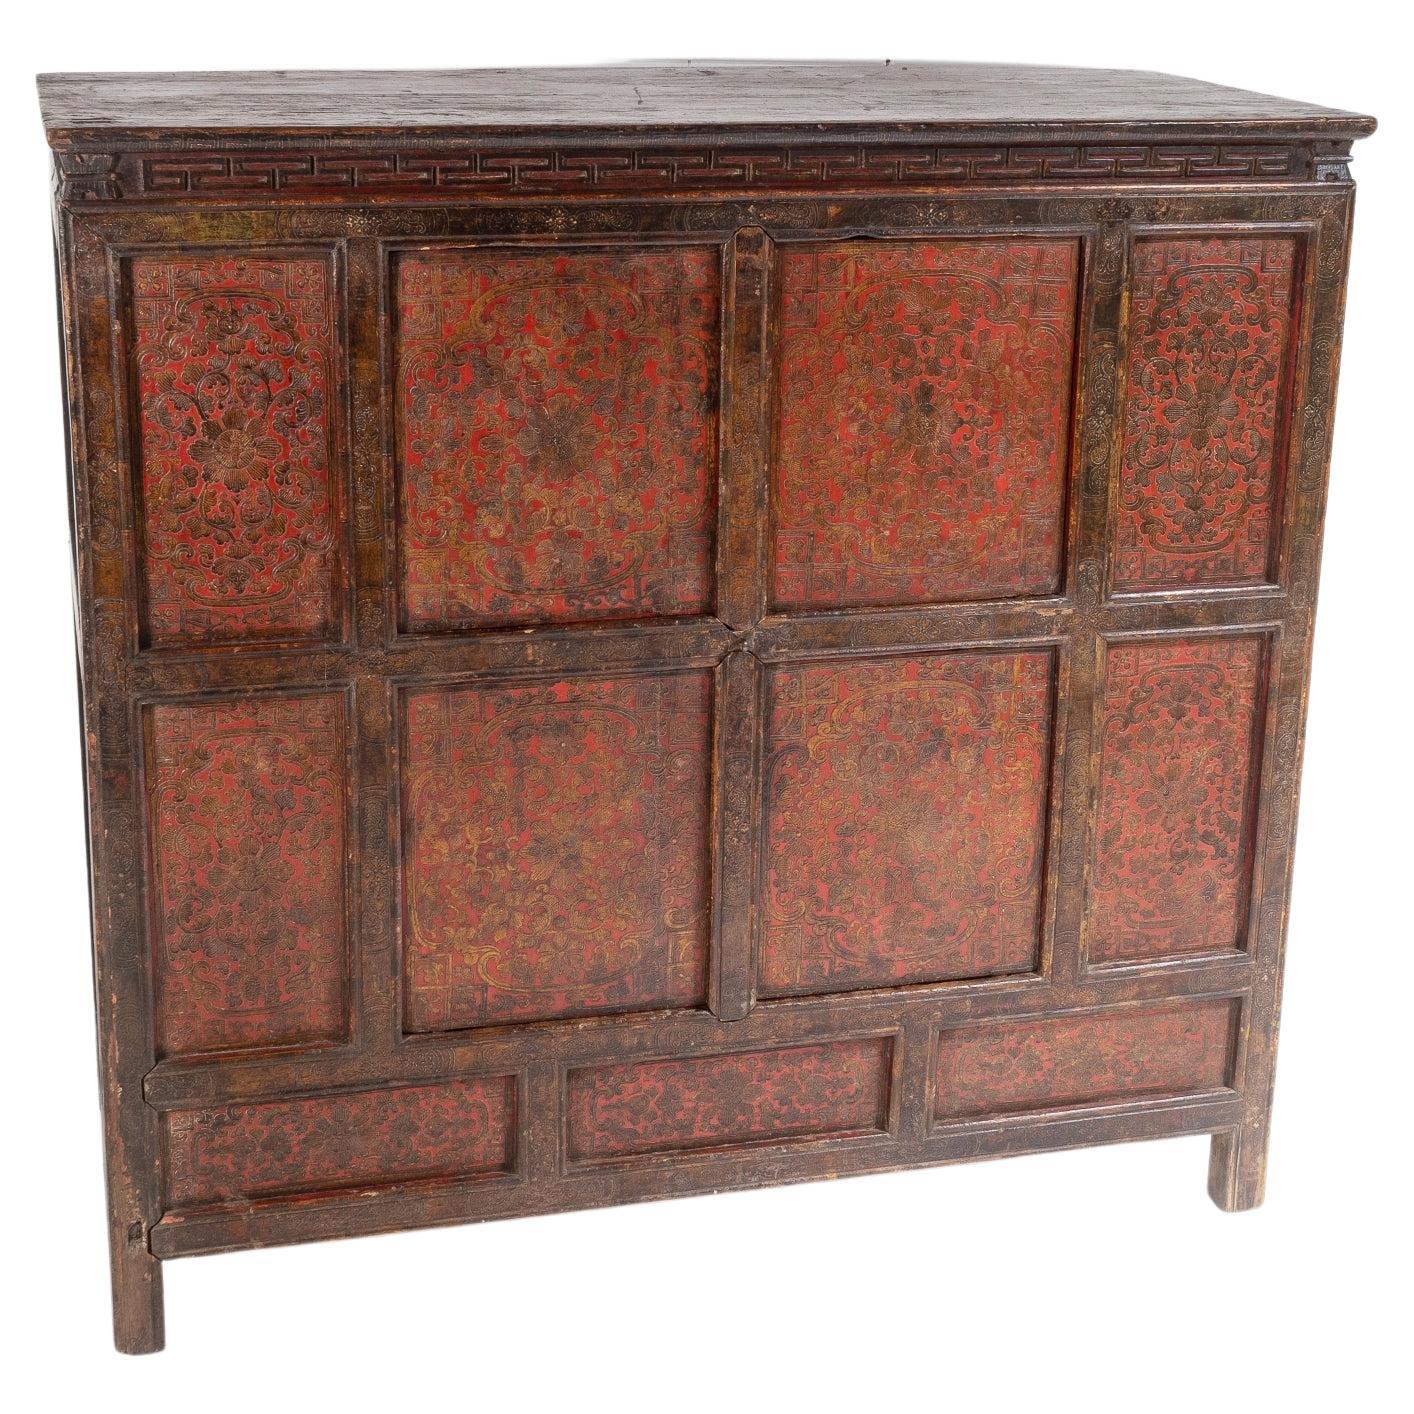 Original 19thC Large Chinese Tibetan Hand Painted Lacquered Cupboard Sideboard en vente